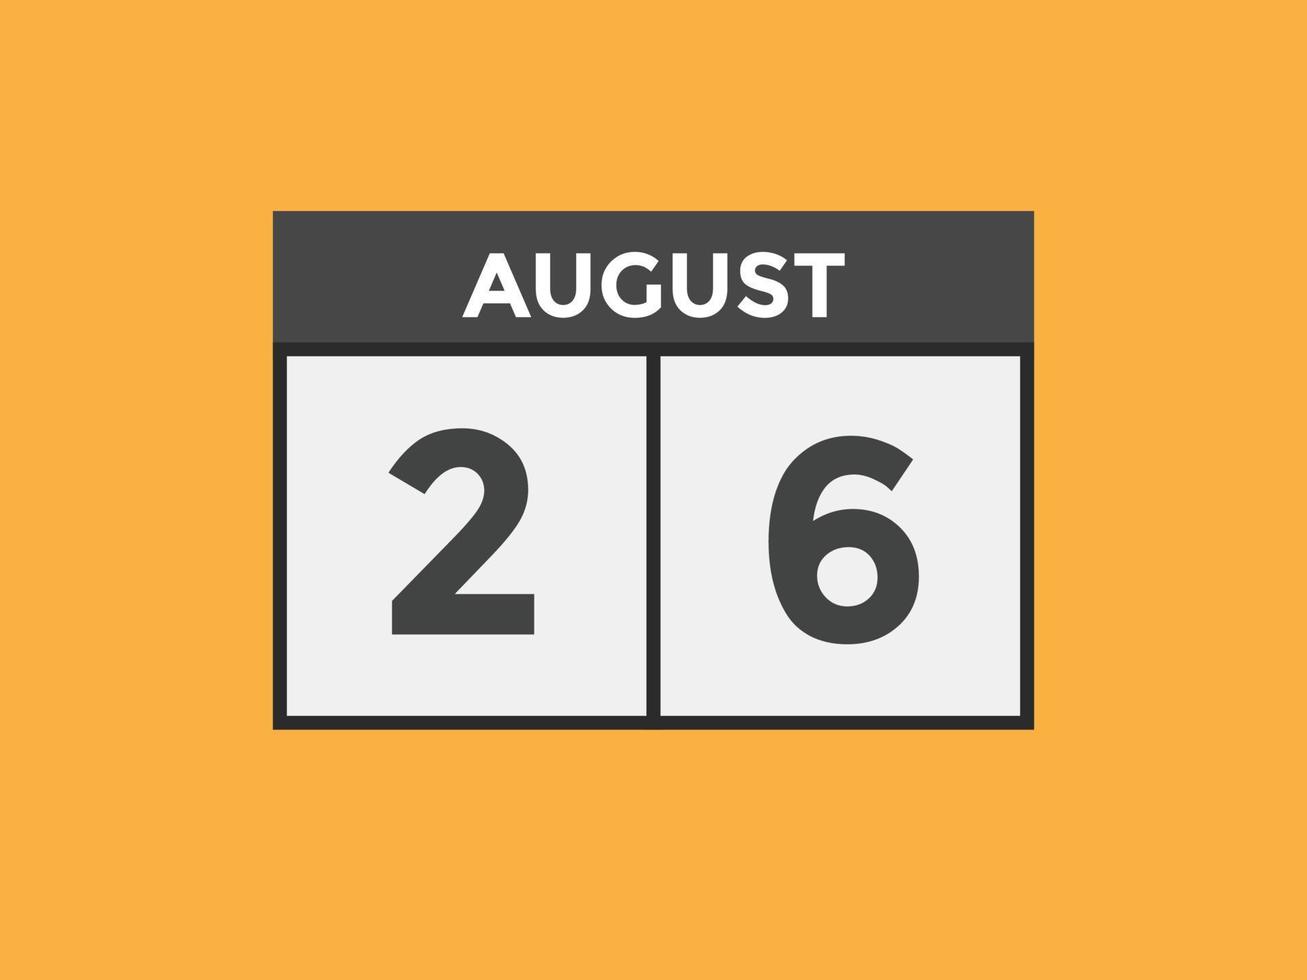 august 26 calendar reminder. 26th august daily calendar icon template. Calendar 26th august icon Design template. Vector illustration